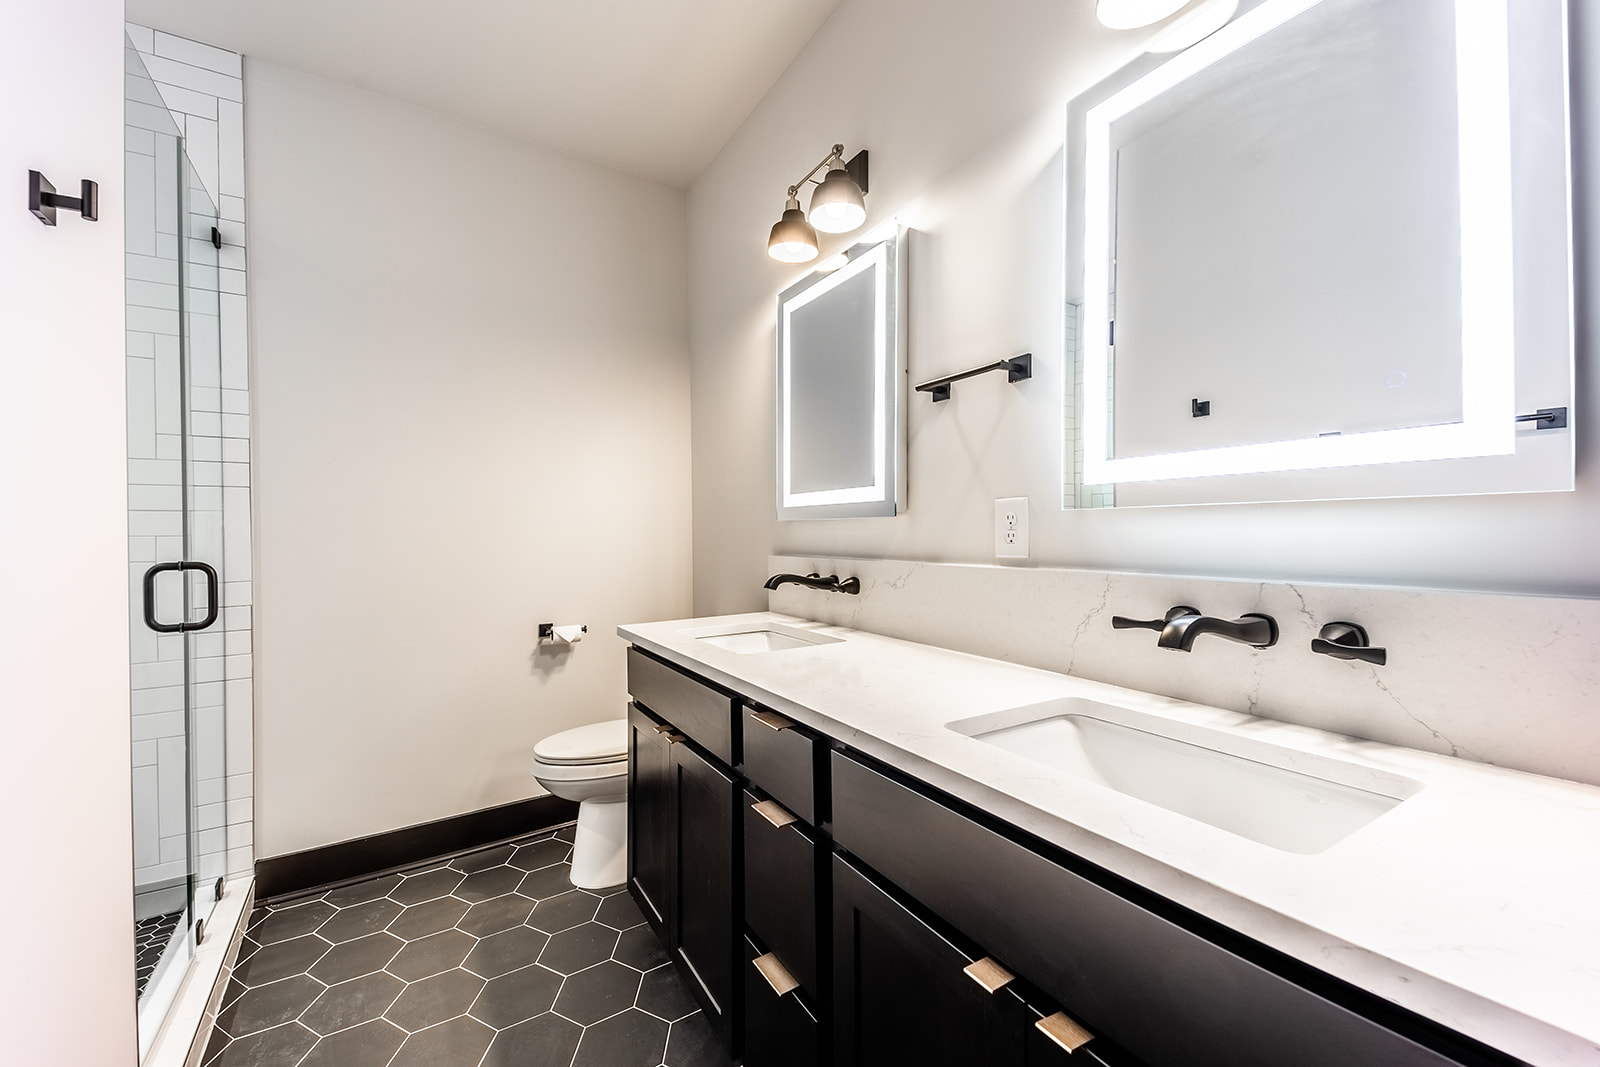 Unit 1: 2nd bathroom with dual vanity, LED mirrors, and walk in shower.